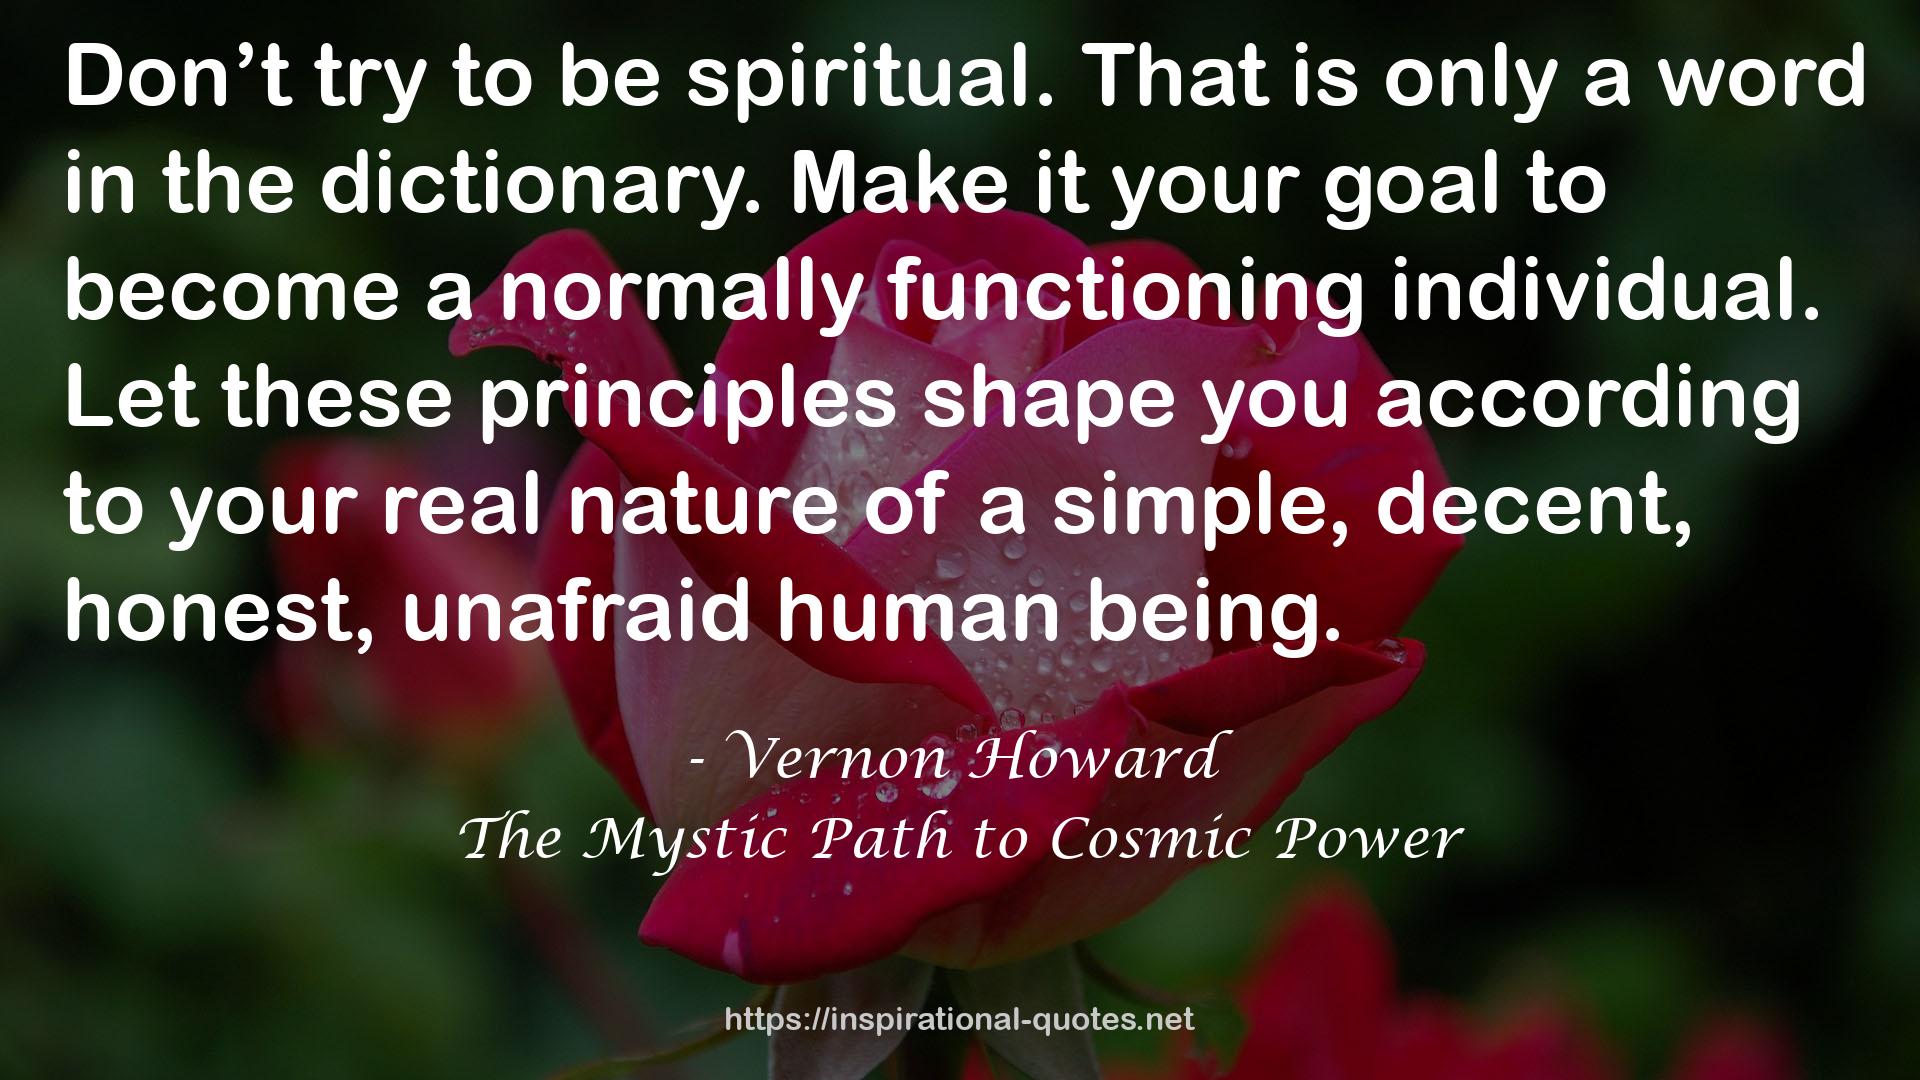 The Mystic Path to Cosmic Power QUOTES